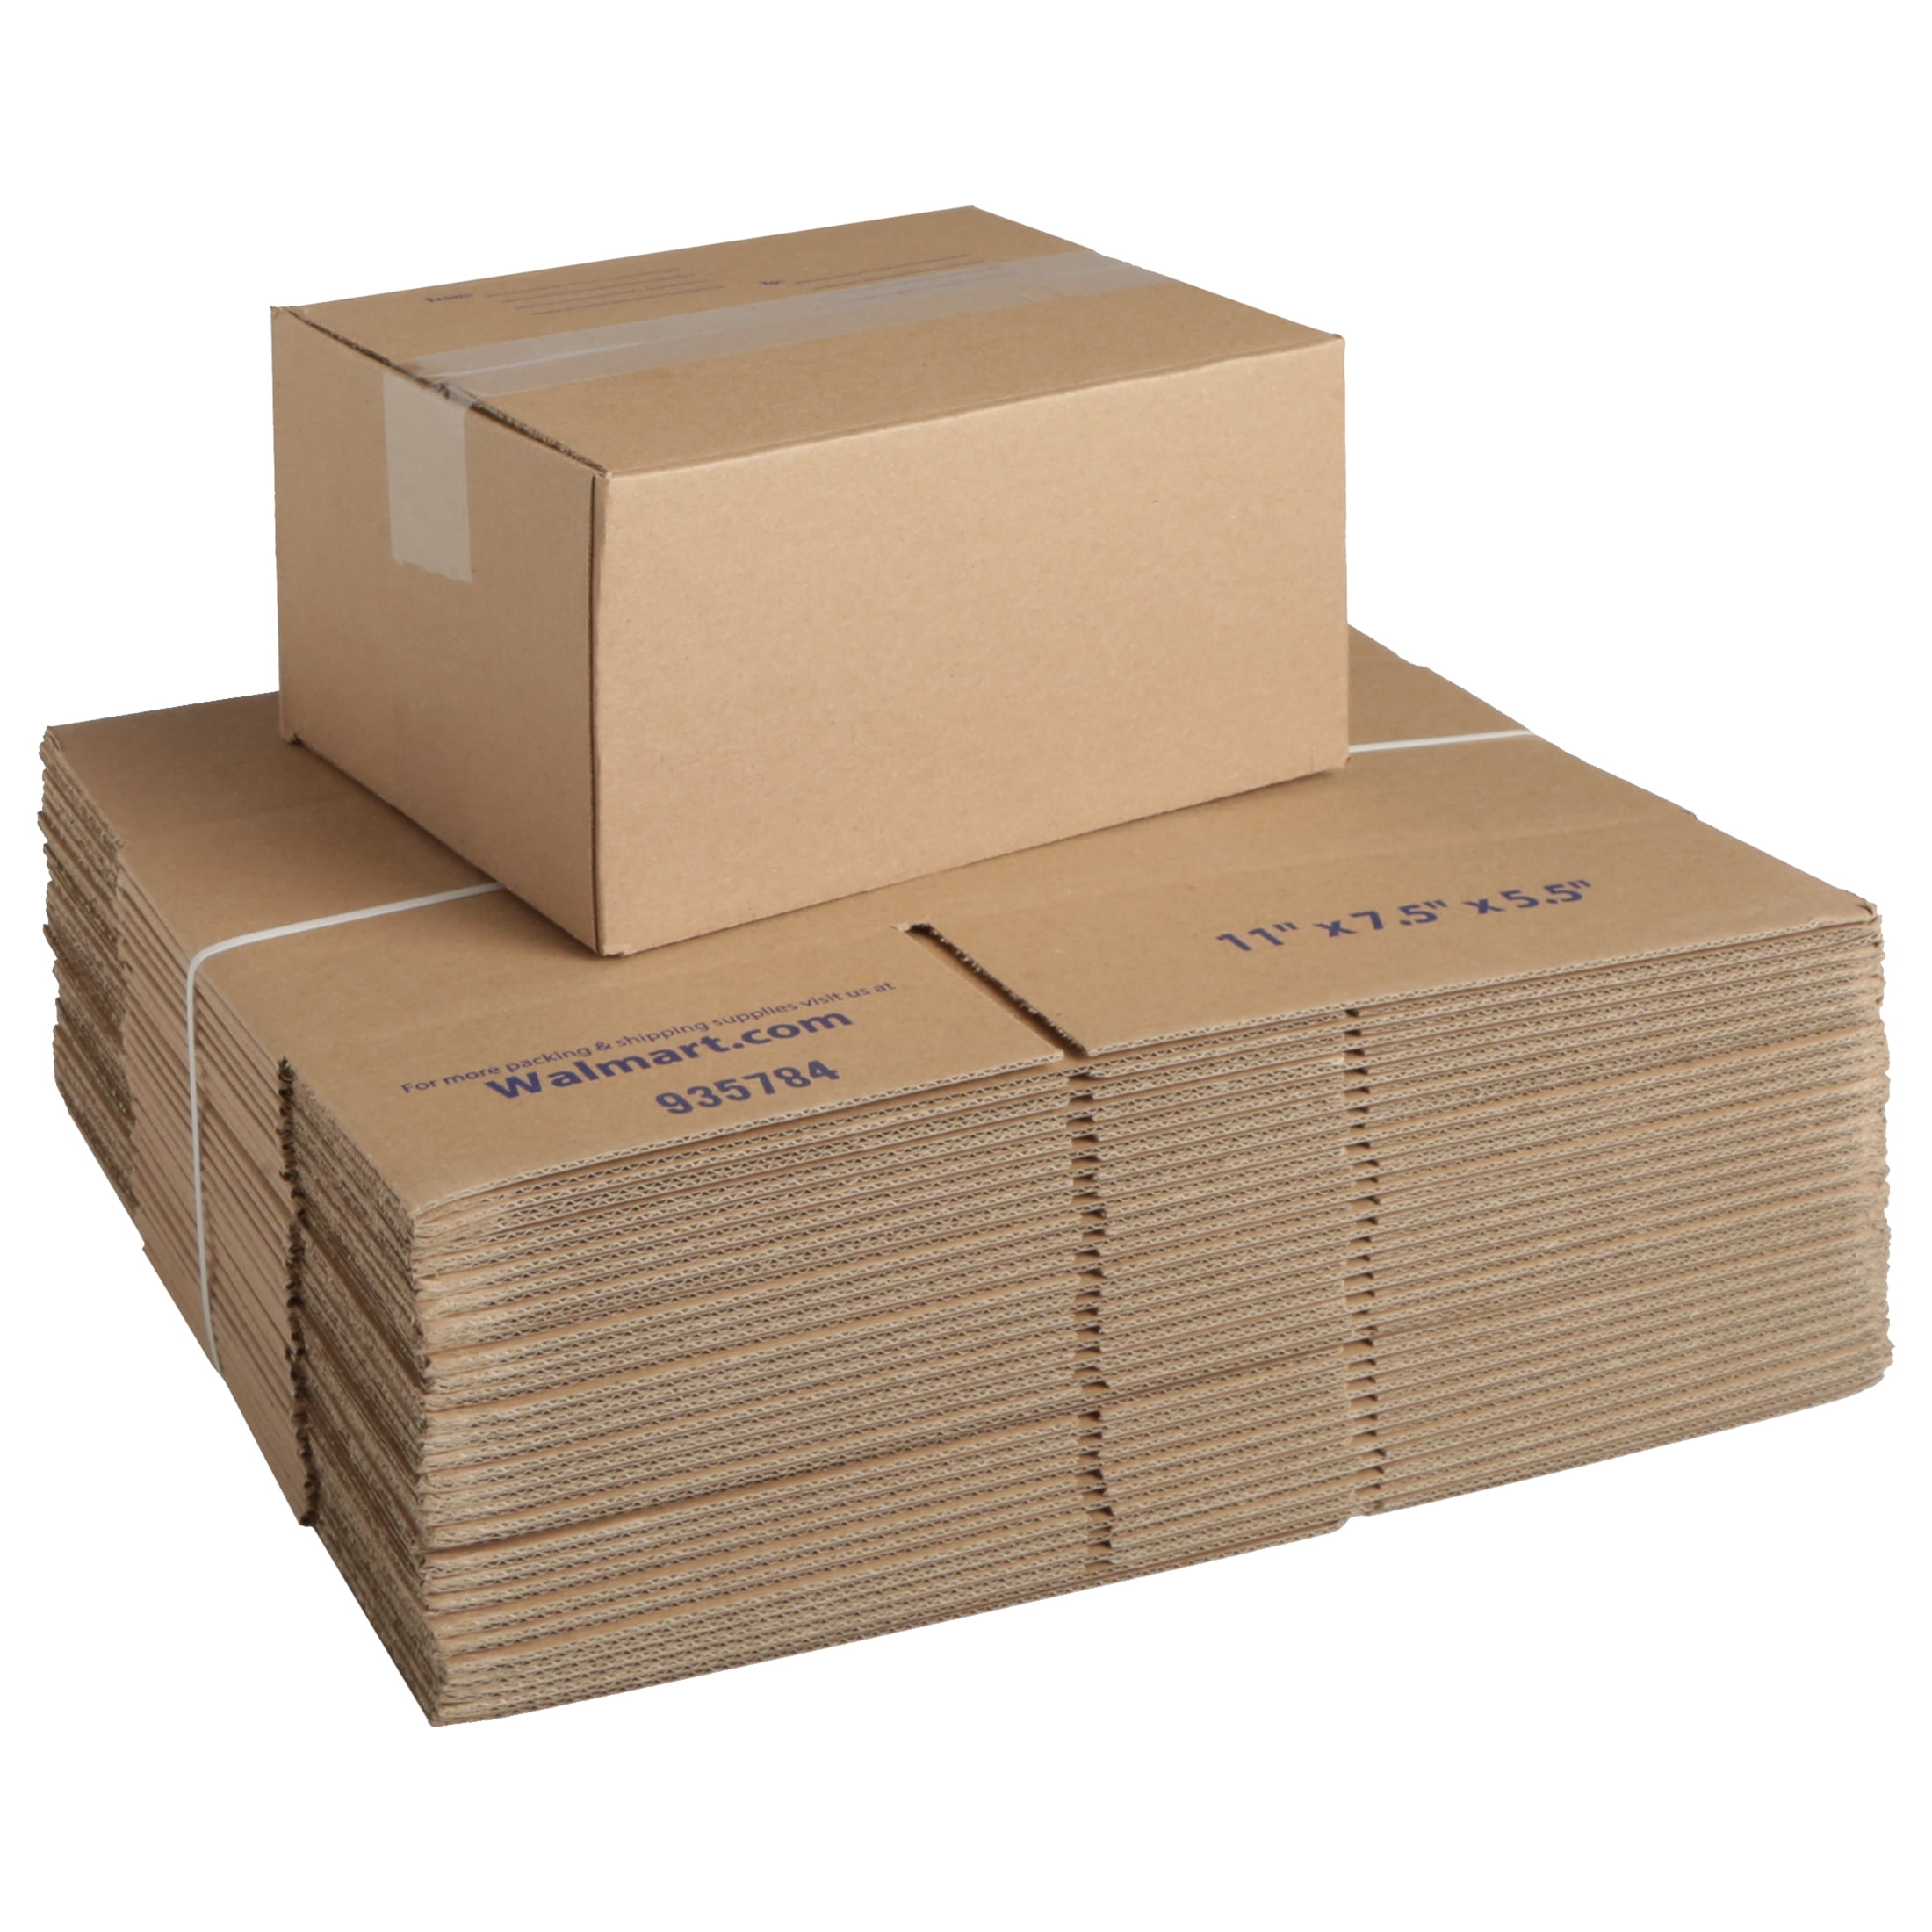 Lot of 65 lbs Capacity ECT-32 24" x 16" x 4" Flat Cardboard Corrugated Boxes 